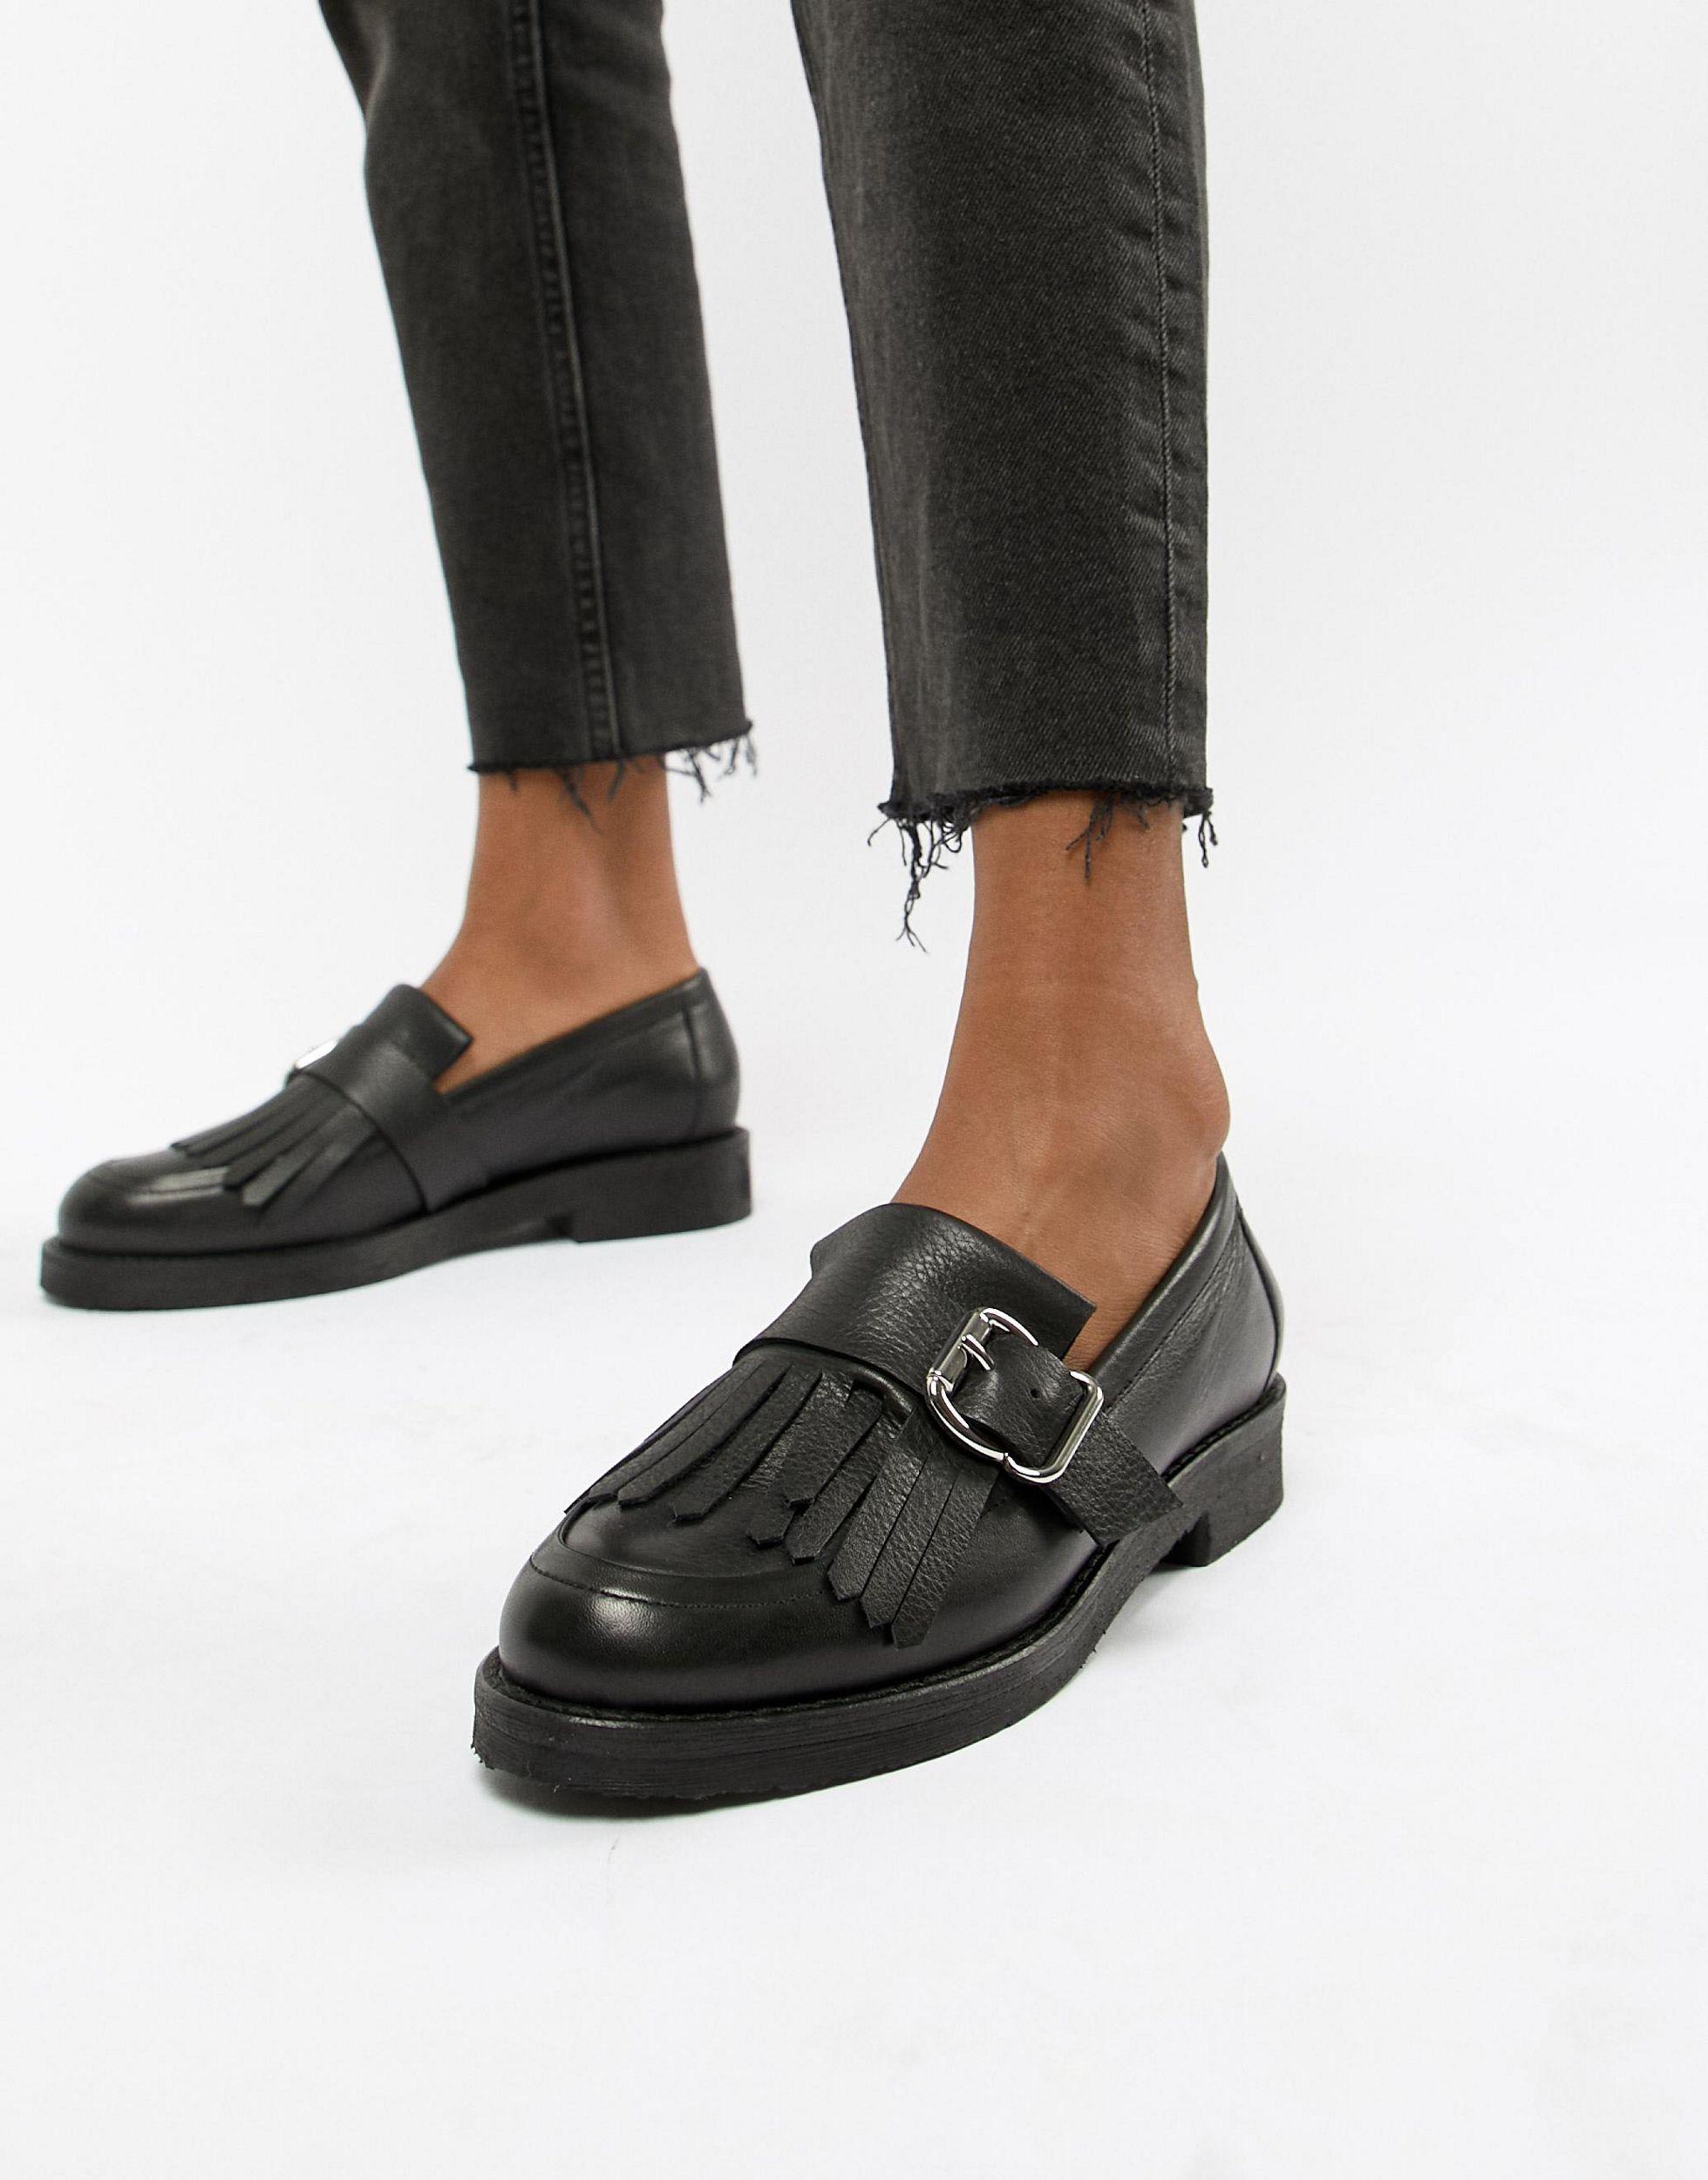 Office Fisher Chunky Black Leather Fringed Buckle Loafers - Lyst